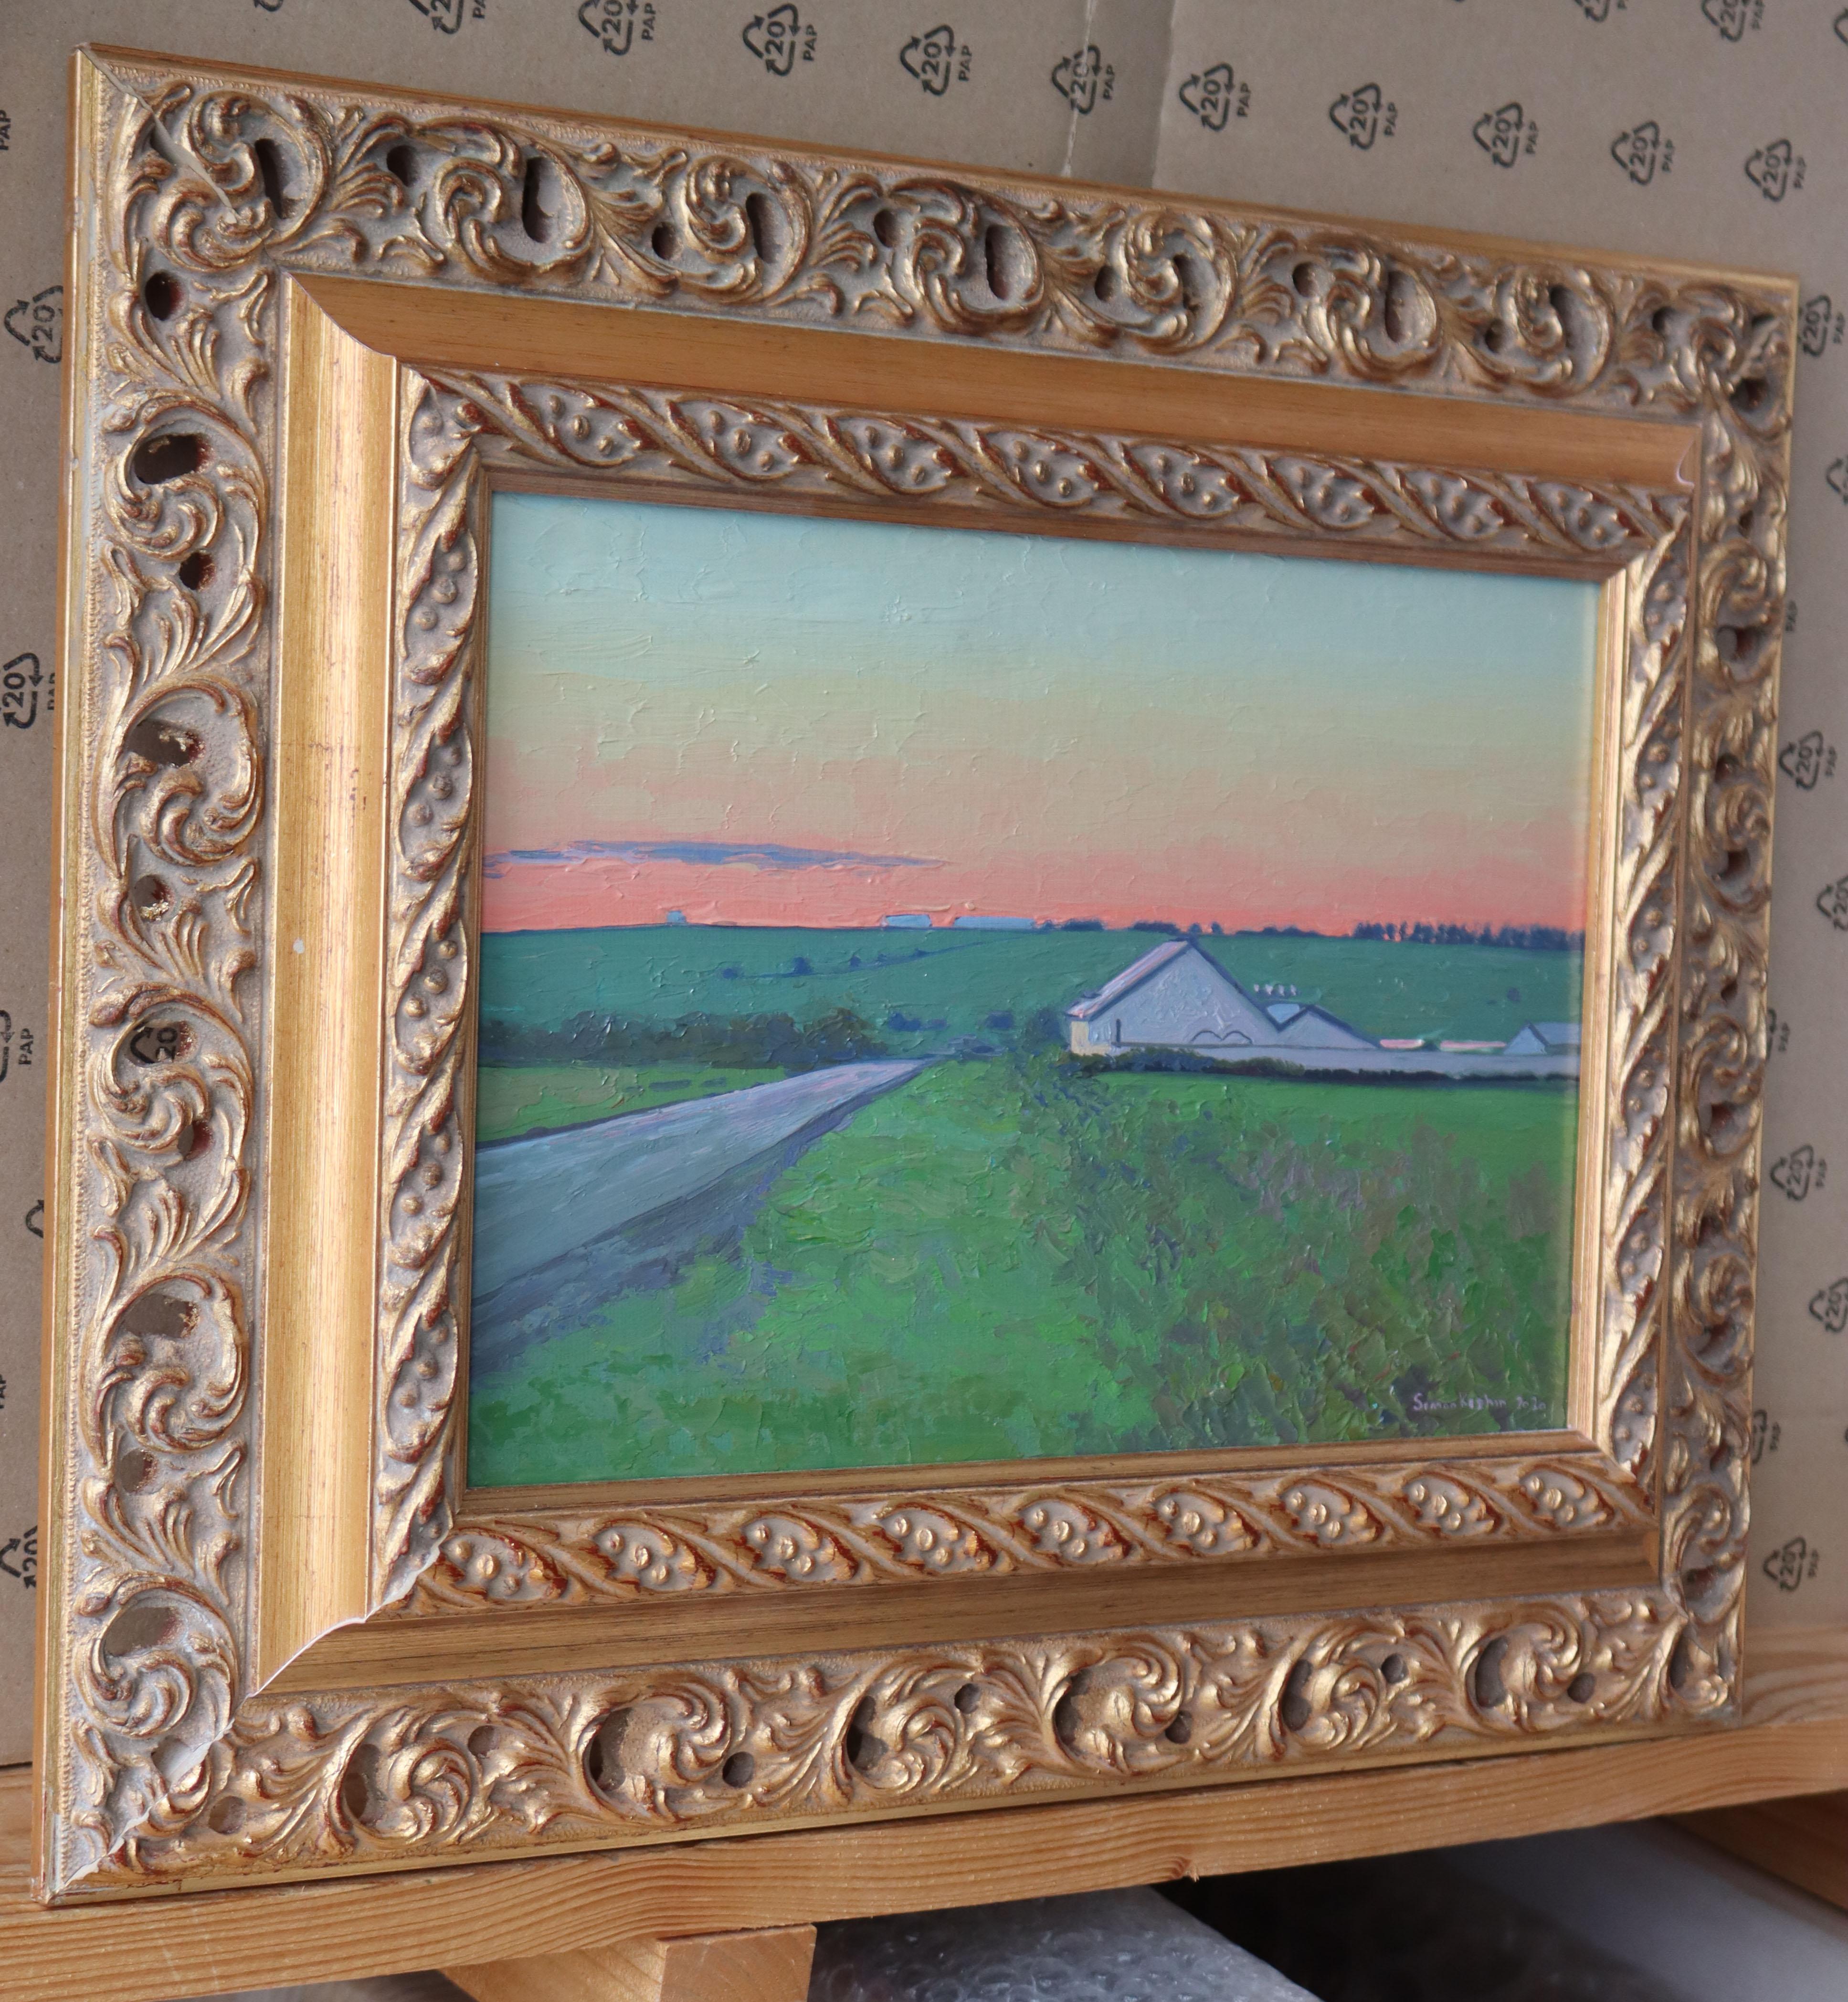 In this oil painting, I've captured the serene twilight that embraces a quaint farm. My brushstrokes balance impressionism's vivacity with realism's grounding harmony, infusing the canvas with the tranquility of a day's end. The vibrant hues of the